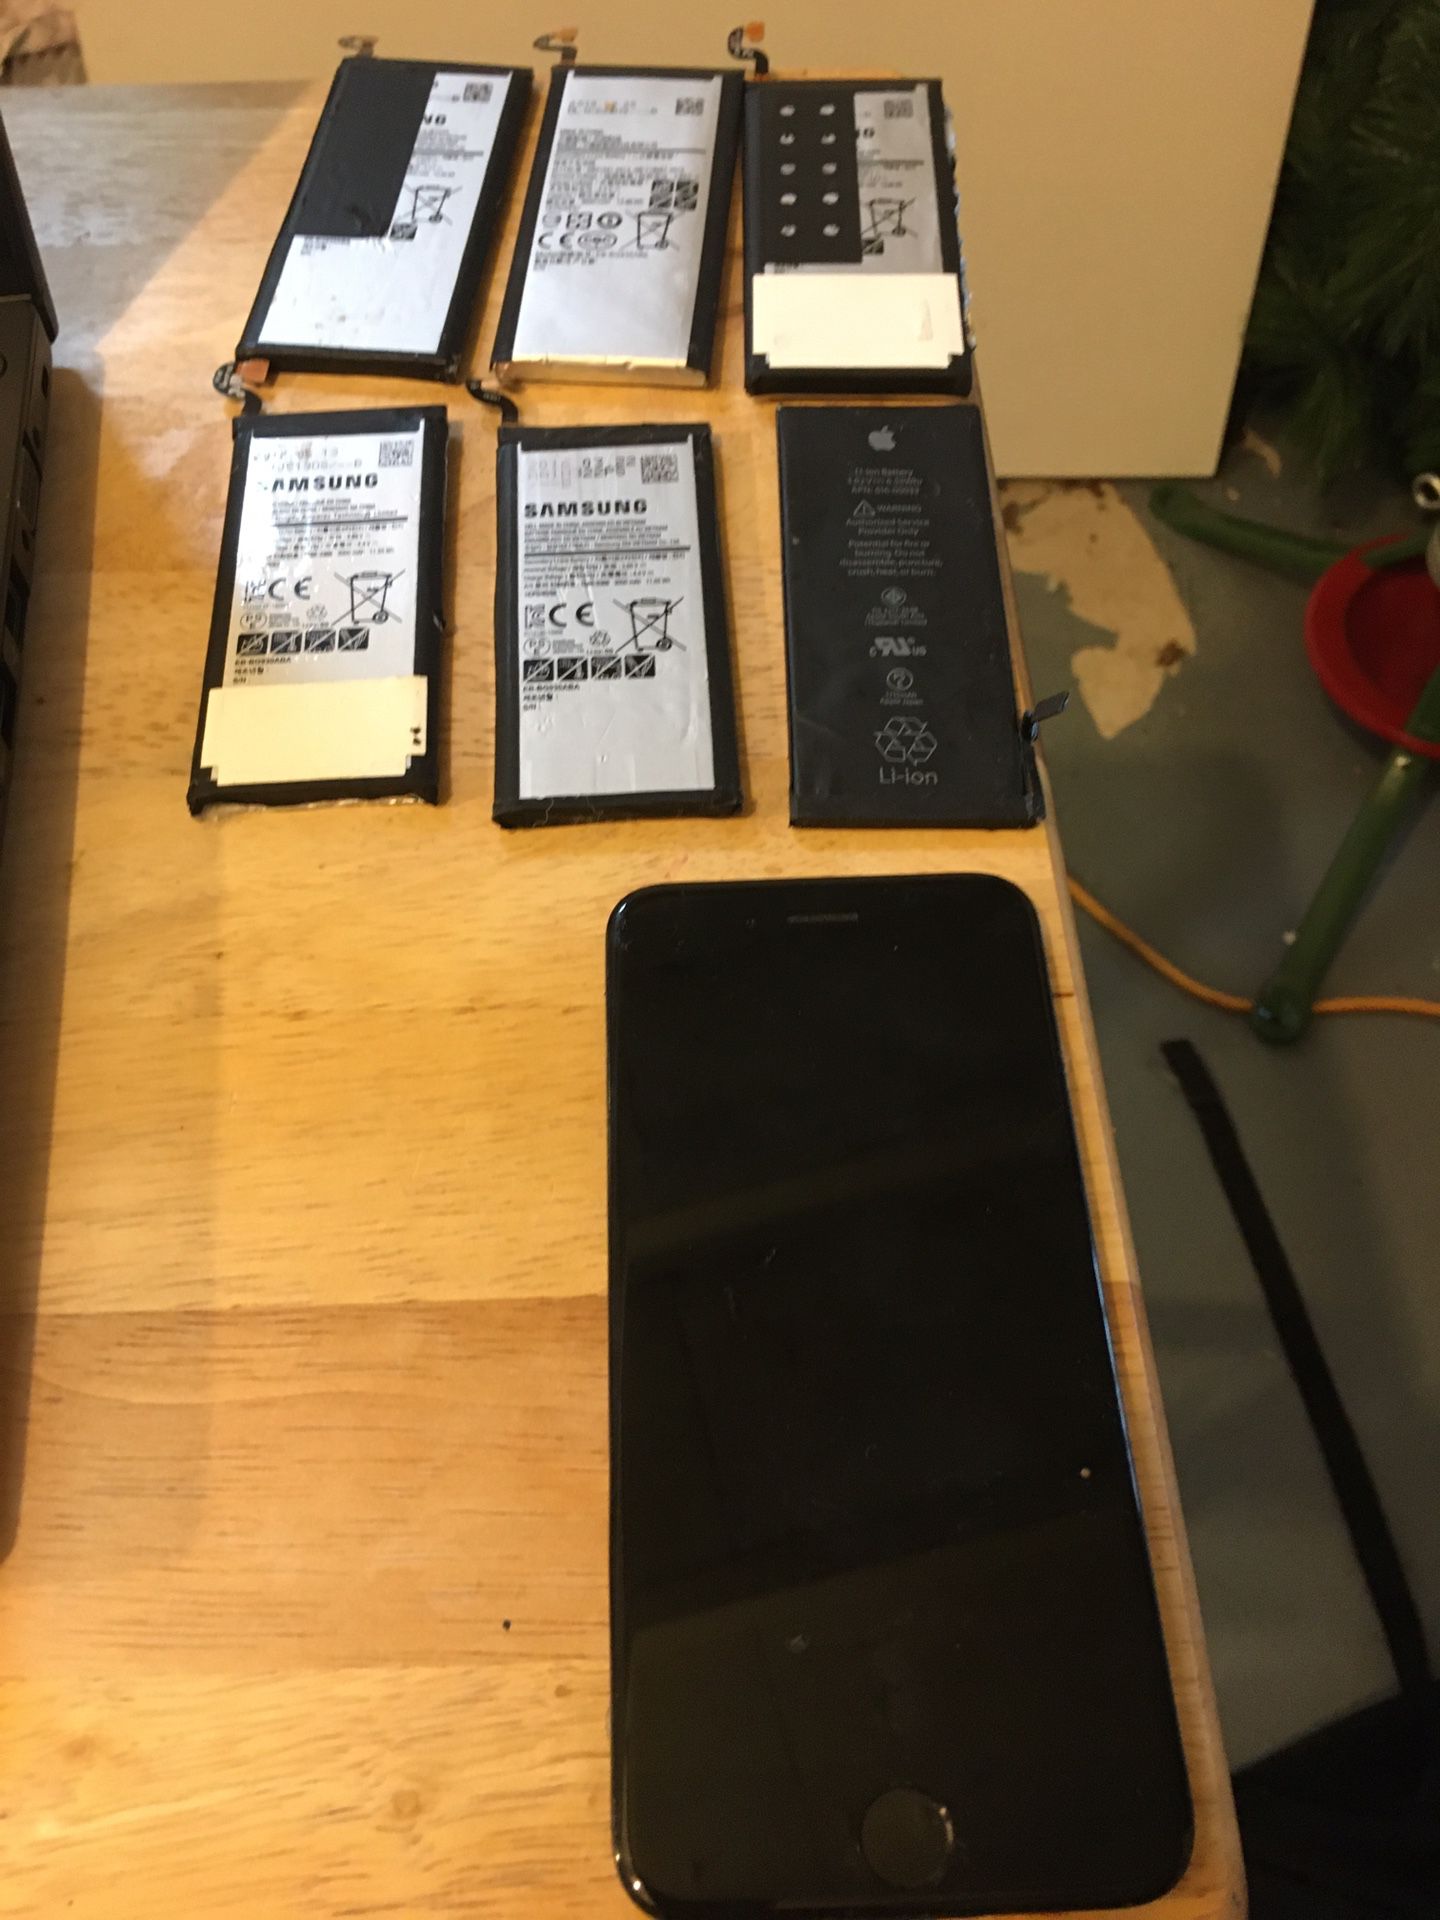 Smartphone Used Batteries and Broken Screen Both Samsung and iPhone.